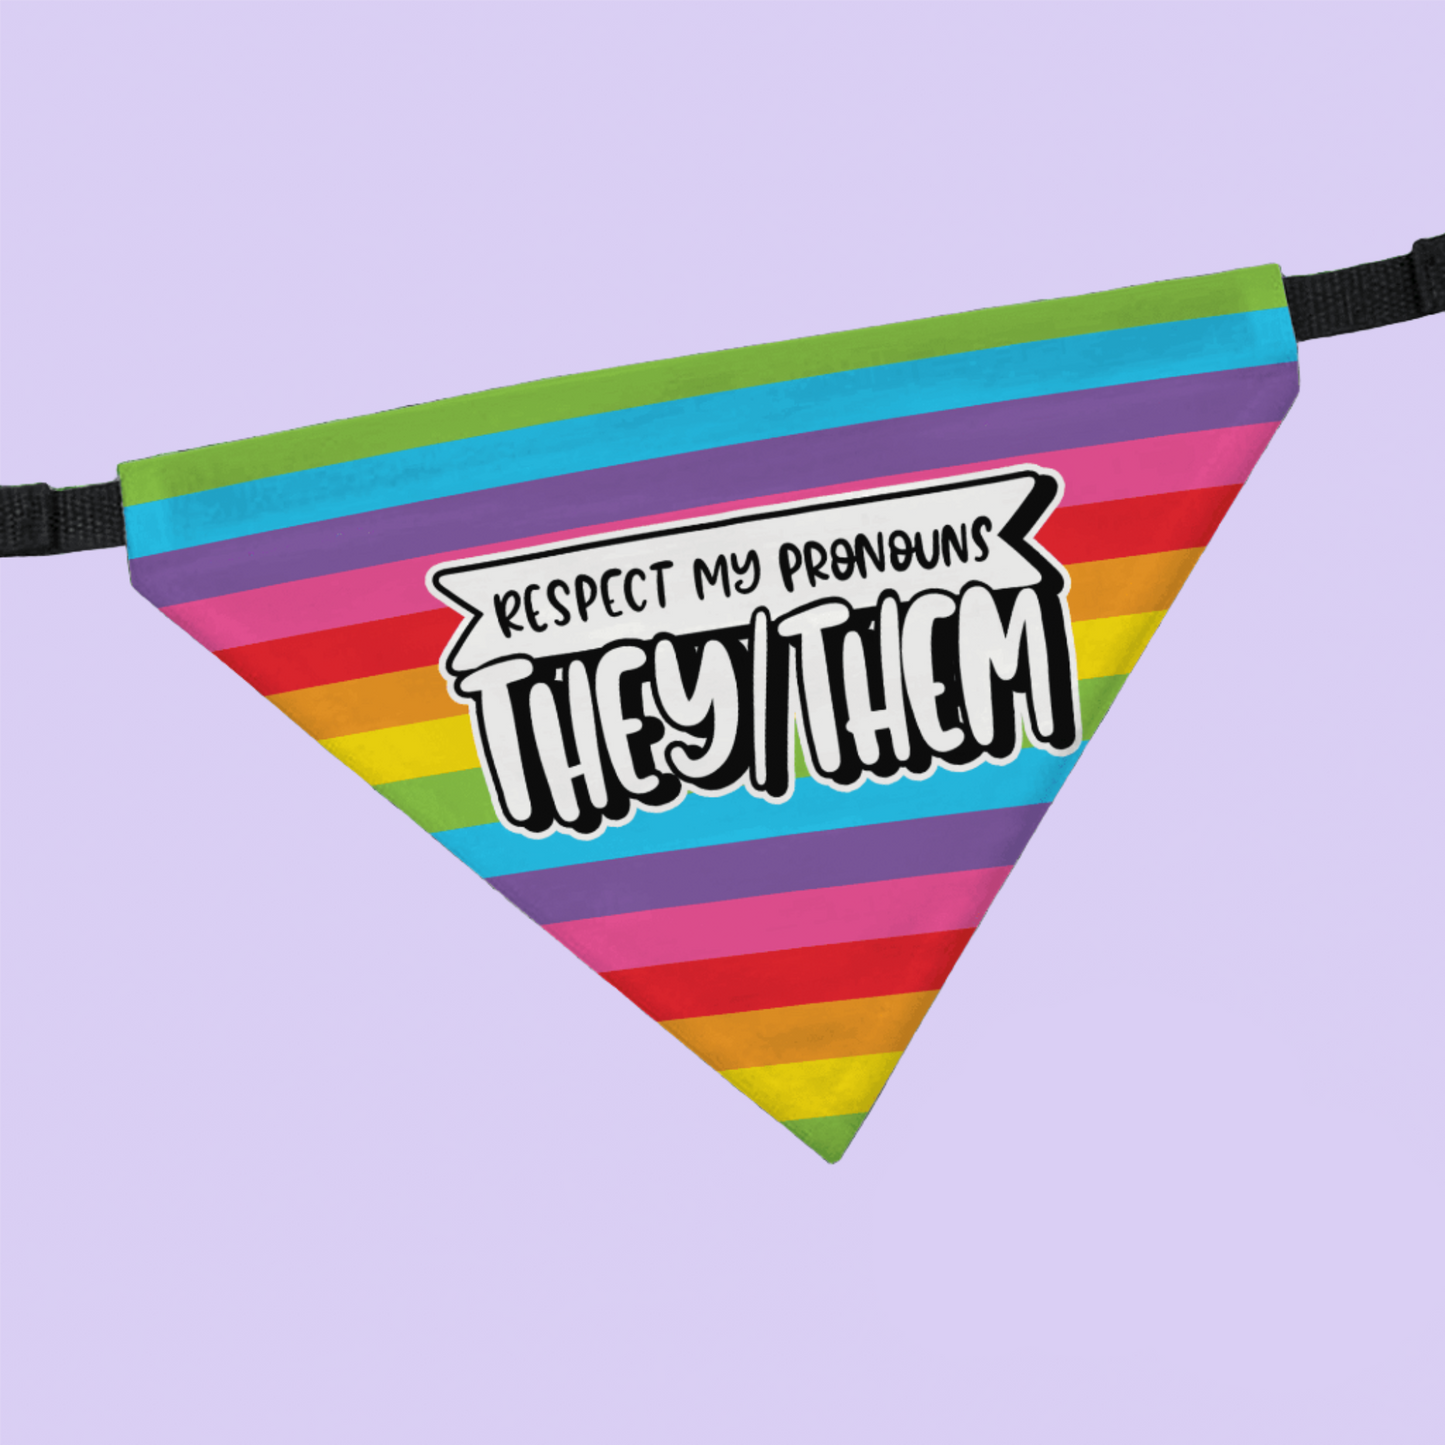 Respect My Pronouns (They/Them) Pet Collar Bandana - Two Crafty Gays